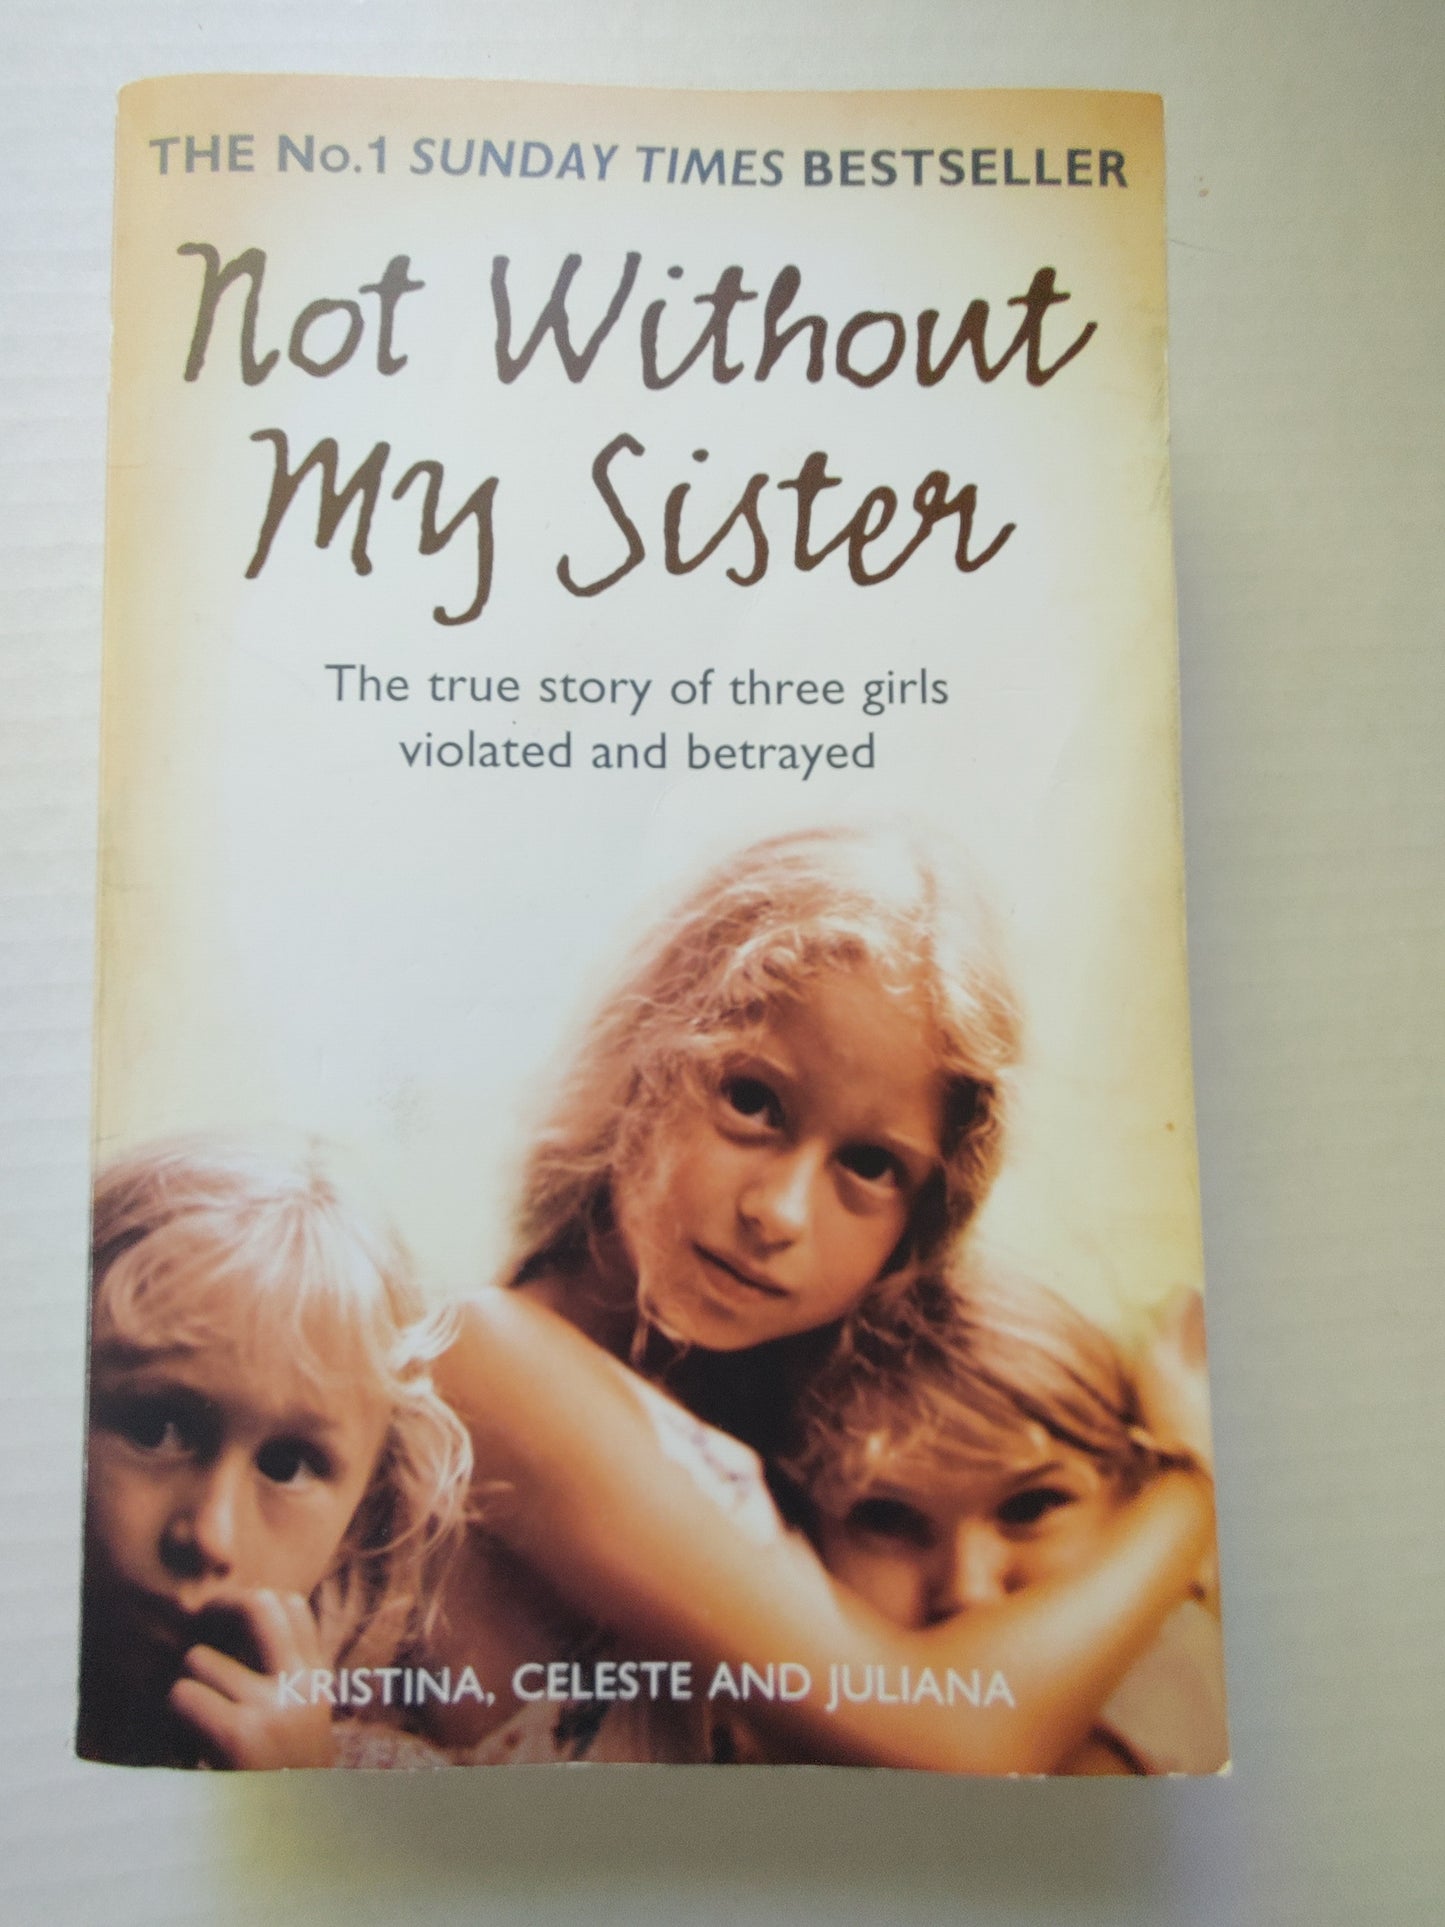 Not without My Sister: the True Story of Three Girls Violated and Betrayed by Those They Trusted